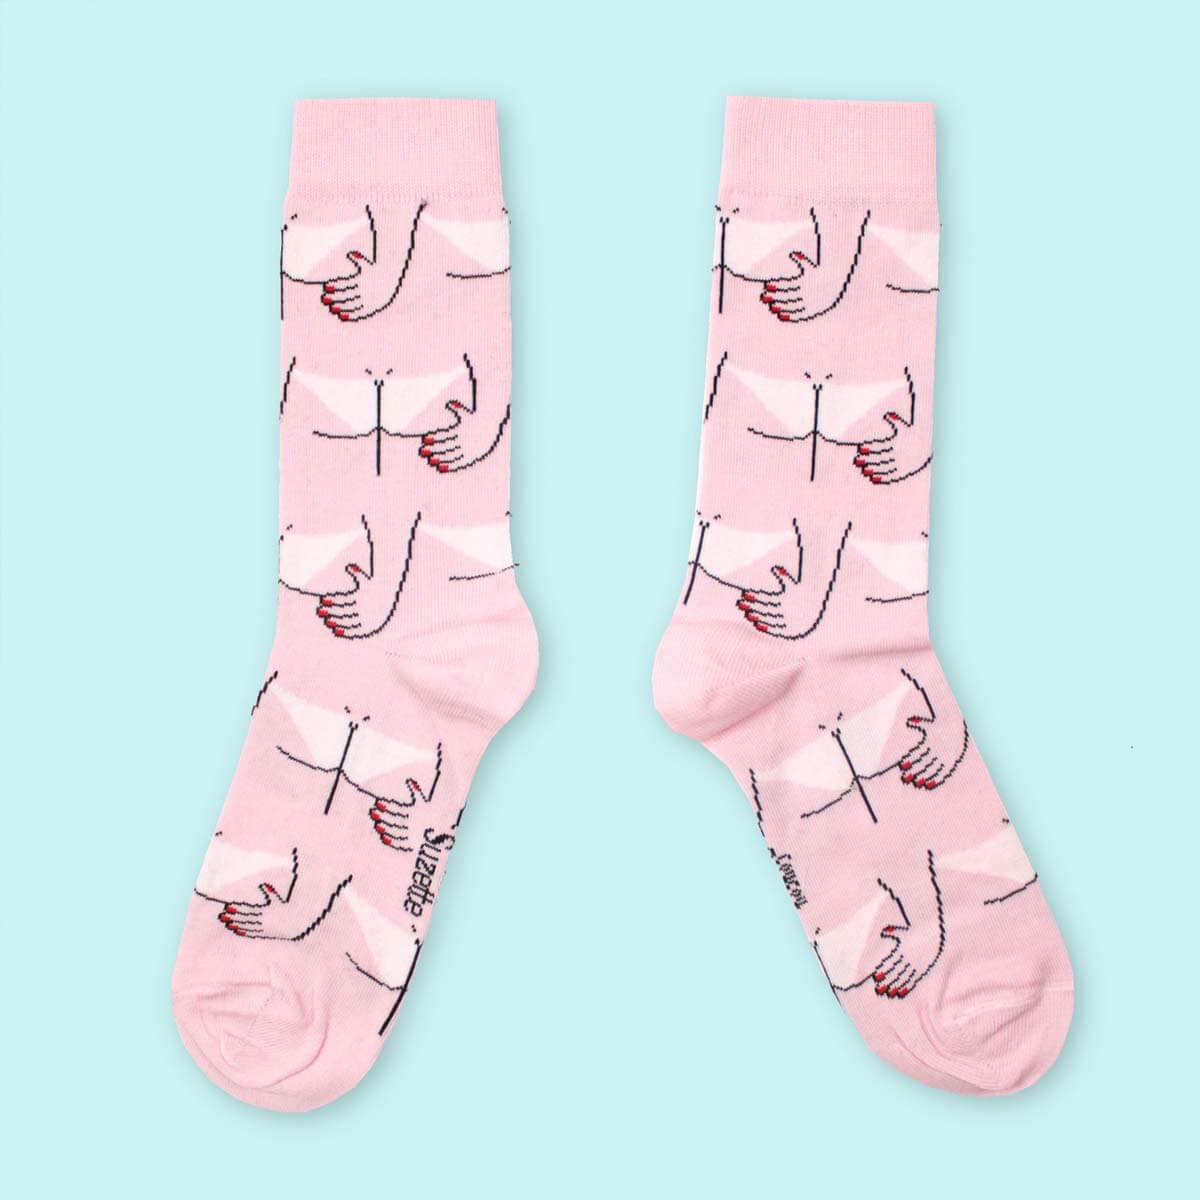 Pink cotton socks with hand on buttocks details over blue background Nudie Co